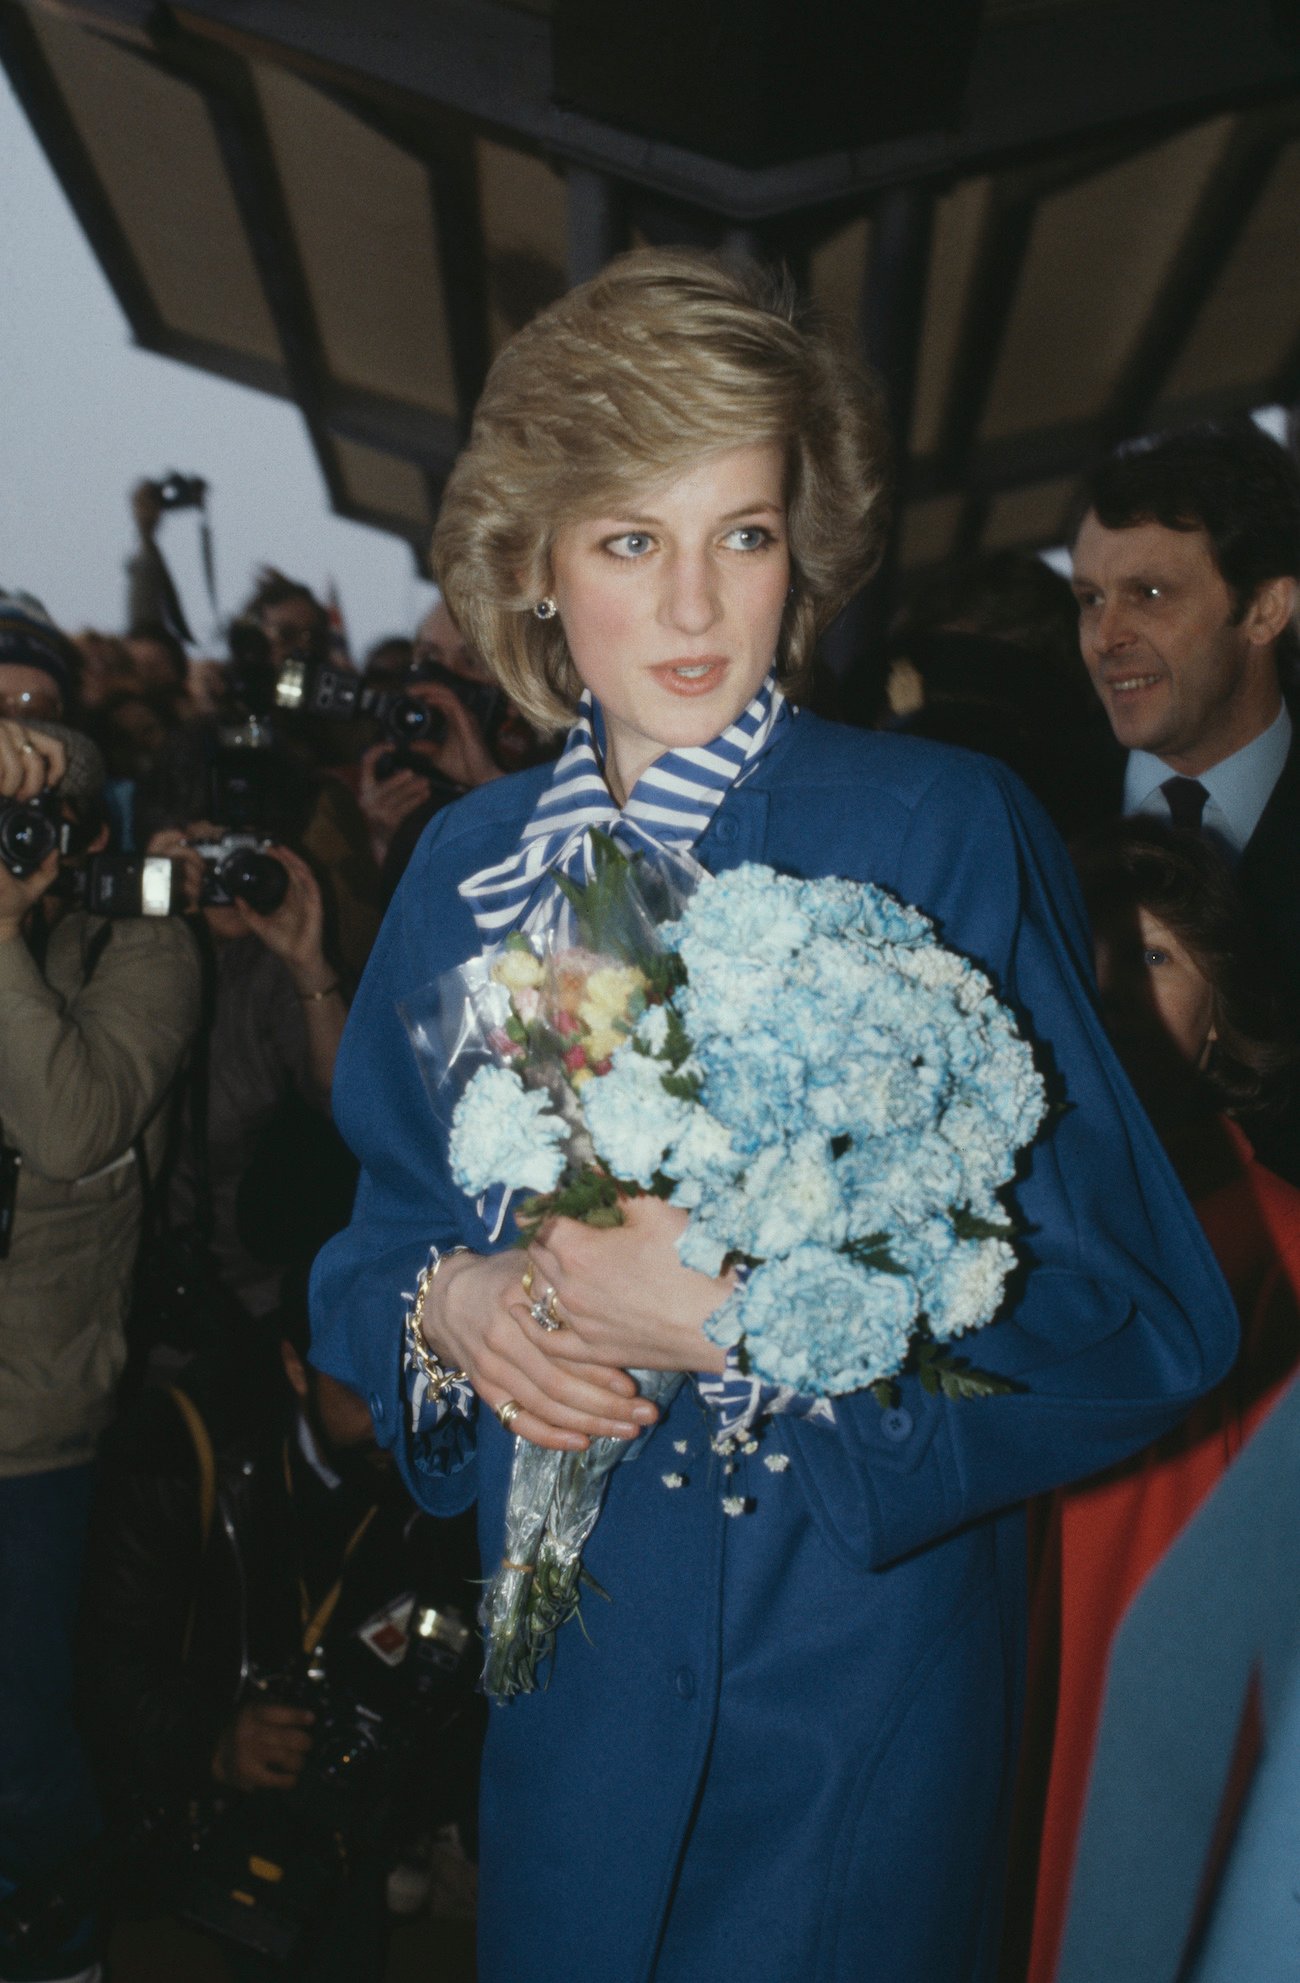 Princess Diana wearing a teal jacket and holding flowers with a crowd in the background